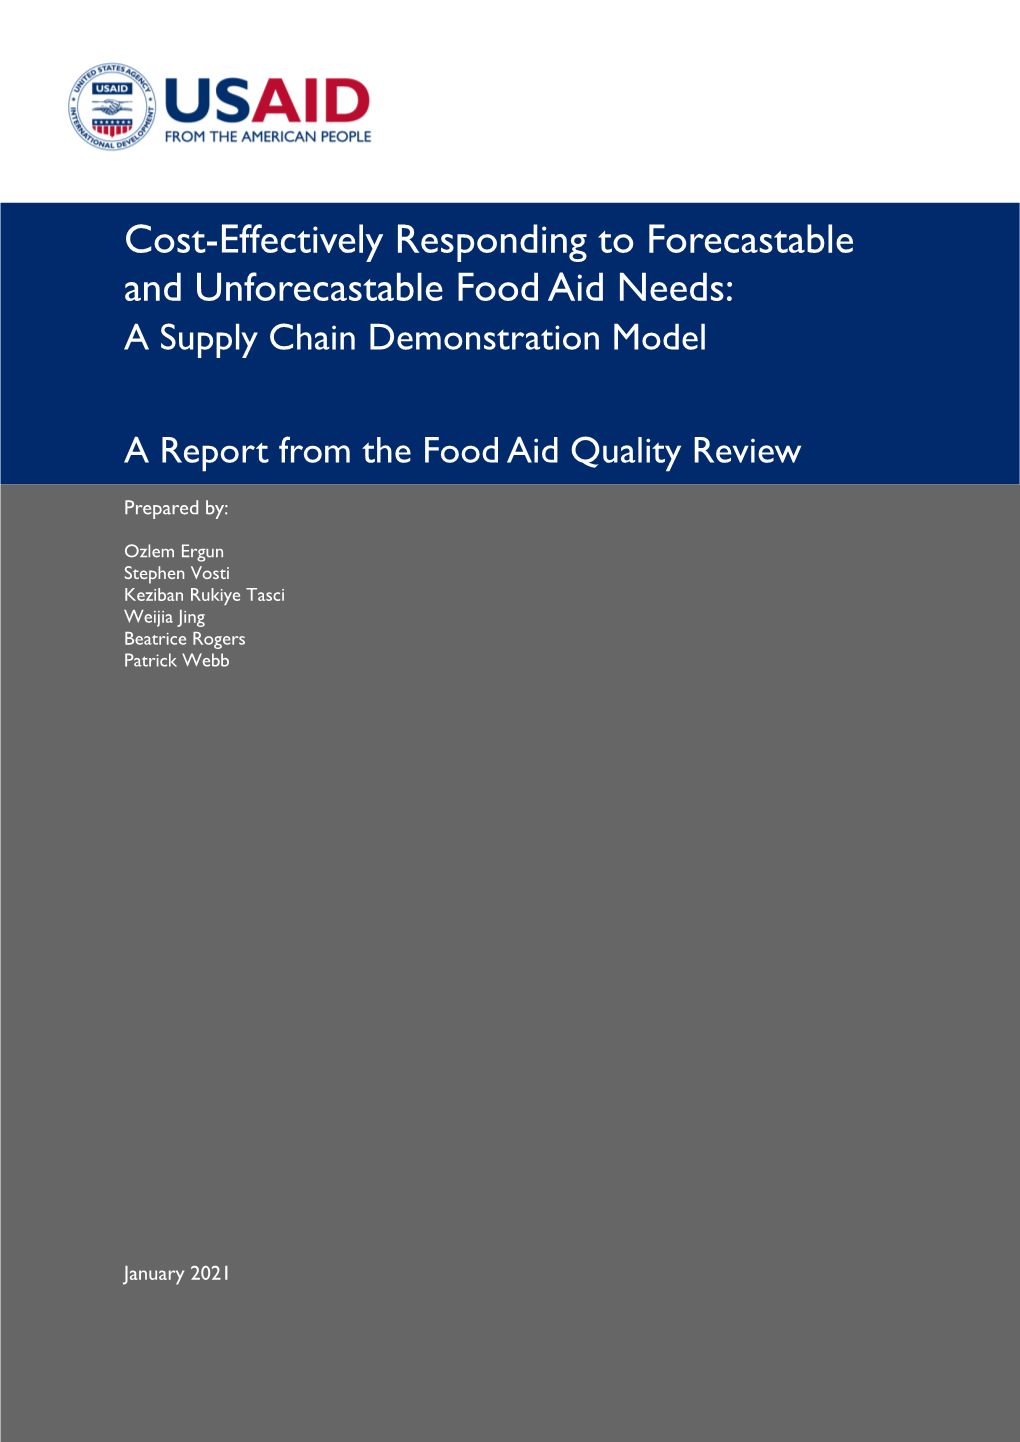 Cost-Effectively Responding to Forecastable and Unforecastable Food Aid Needs: a Supply Chain Demonstration Model